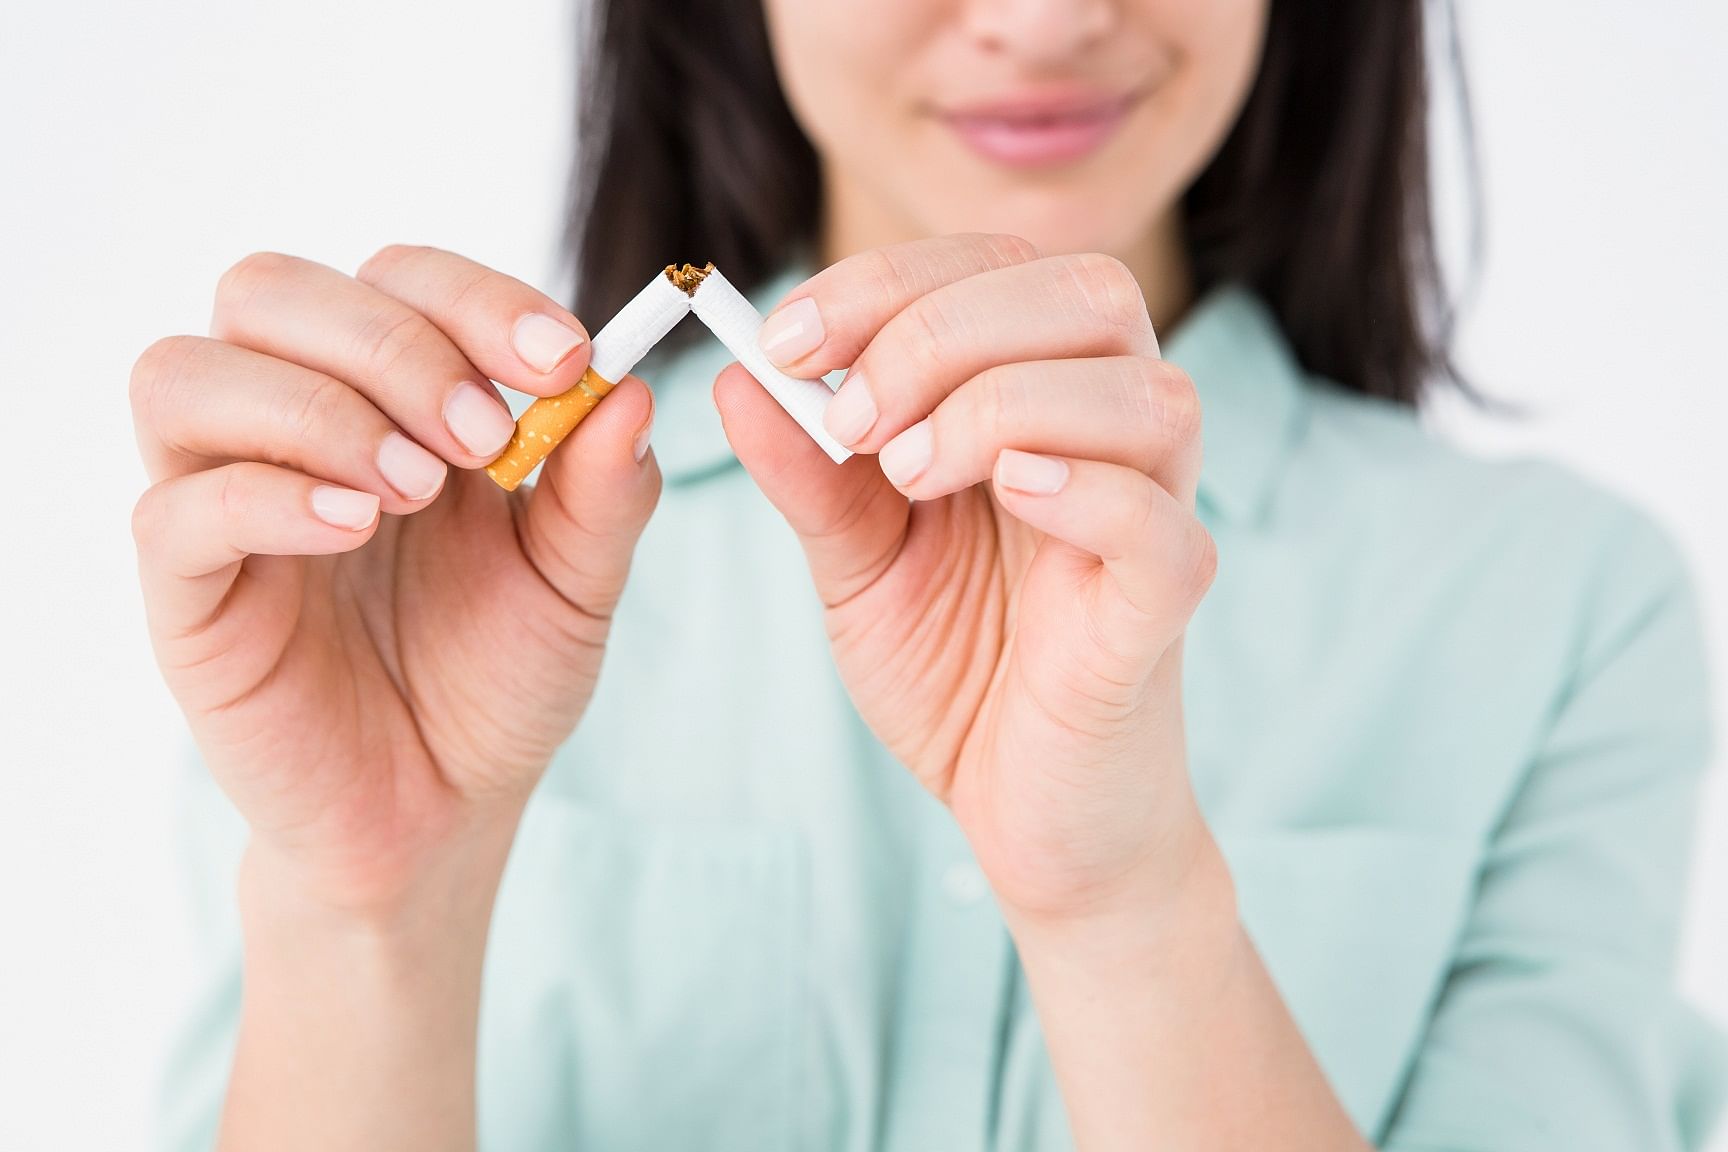 Doctors say that counselling and a strong will are important factors to quit smoking.